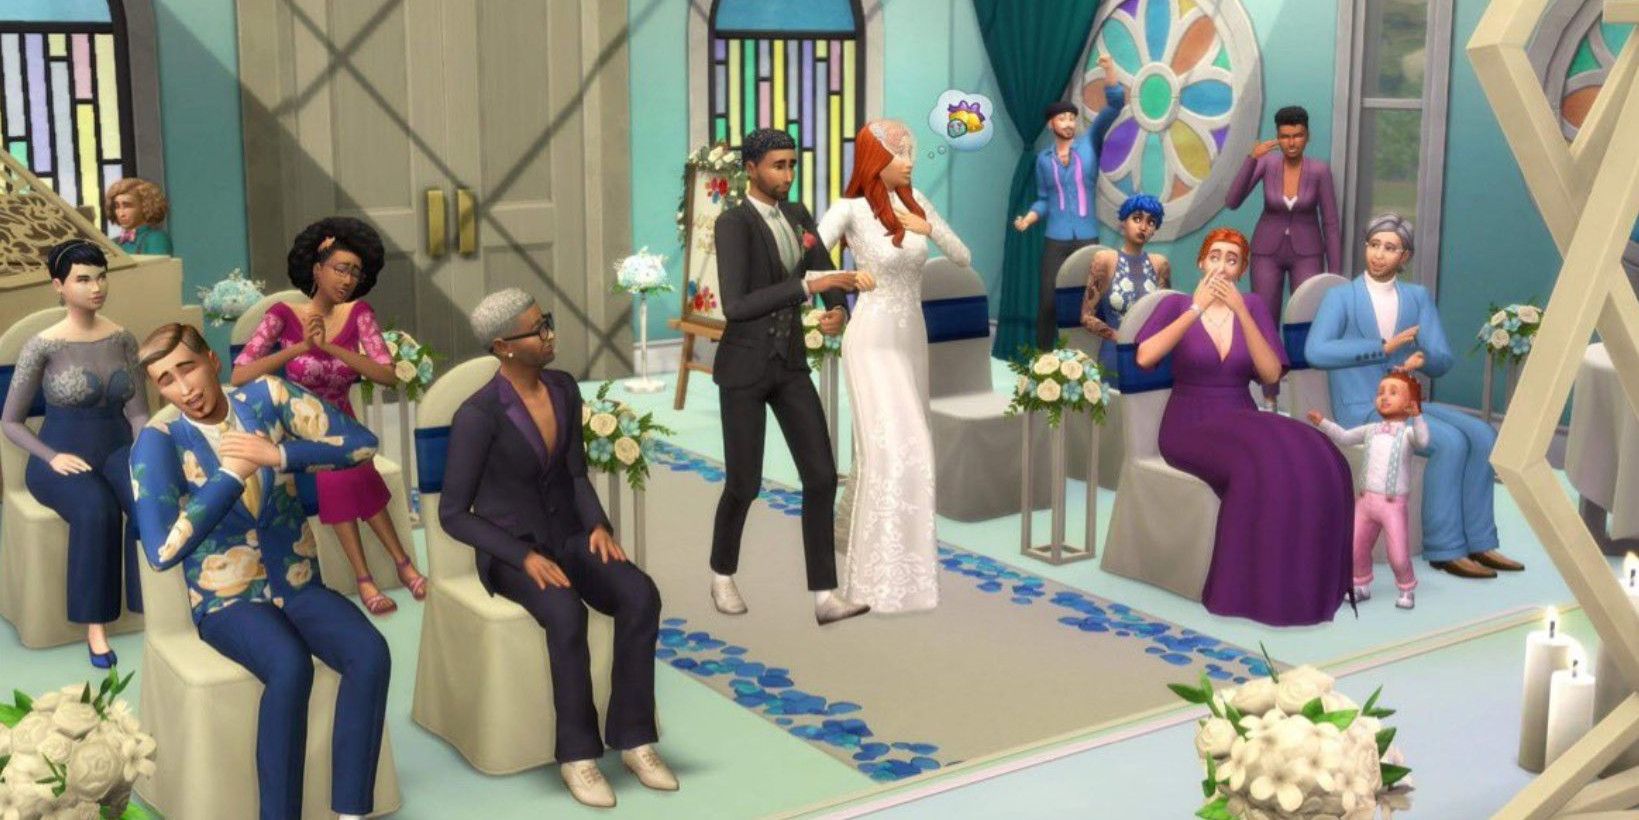 The Sims Evenings – I begin my journey as a Simmer and discover the lives  of different trajectory.